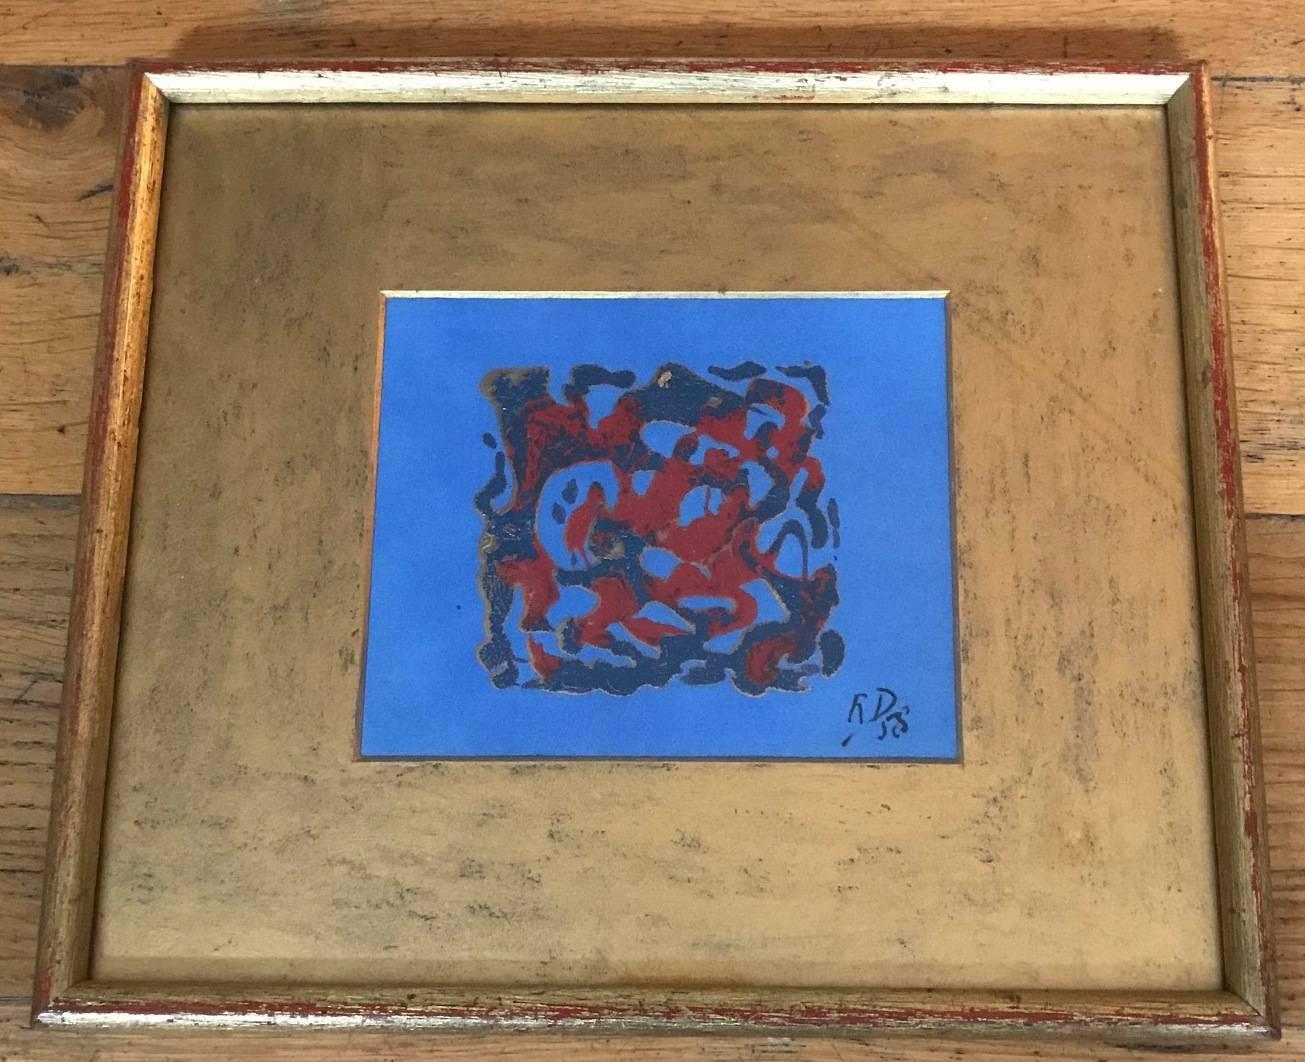 Hand-Painted 1950s French Small Mixed-Media Painting on Silk Framed and Underglaze